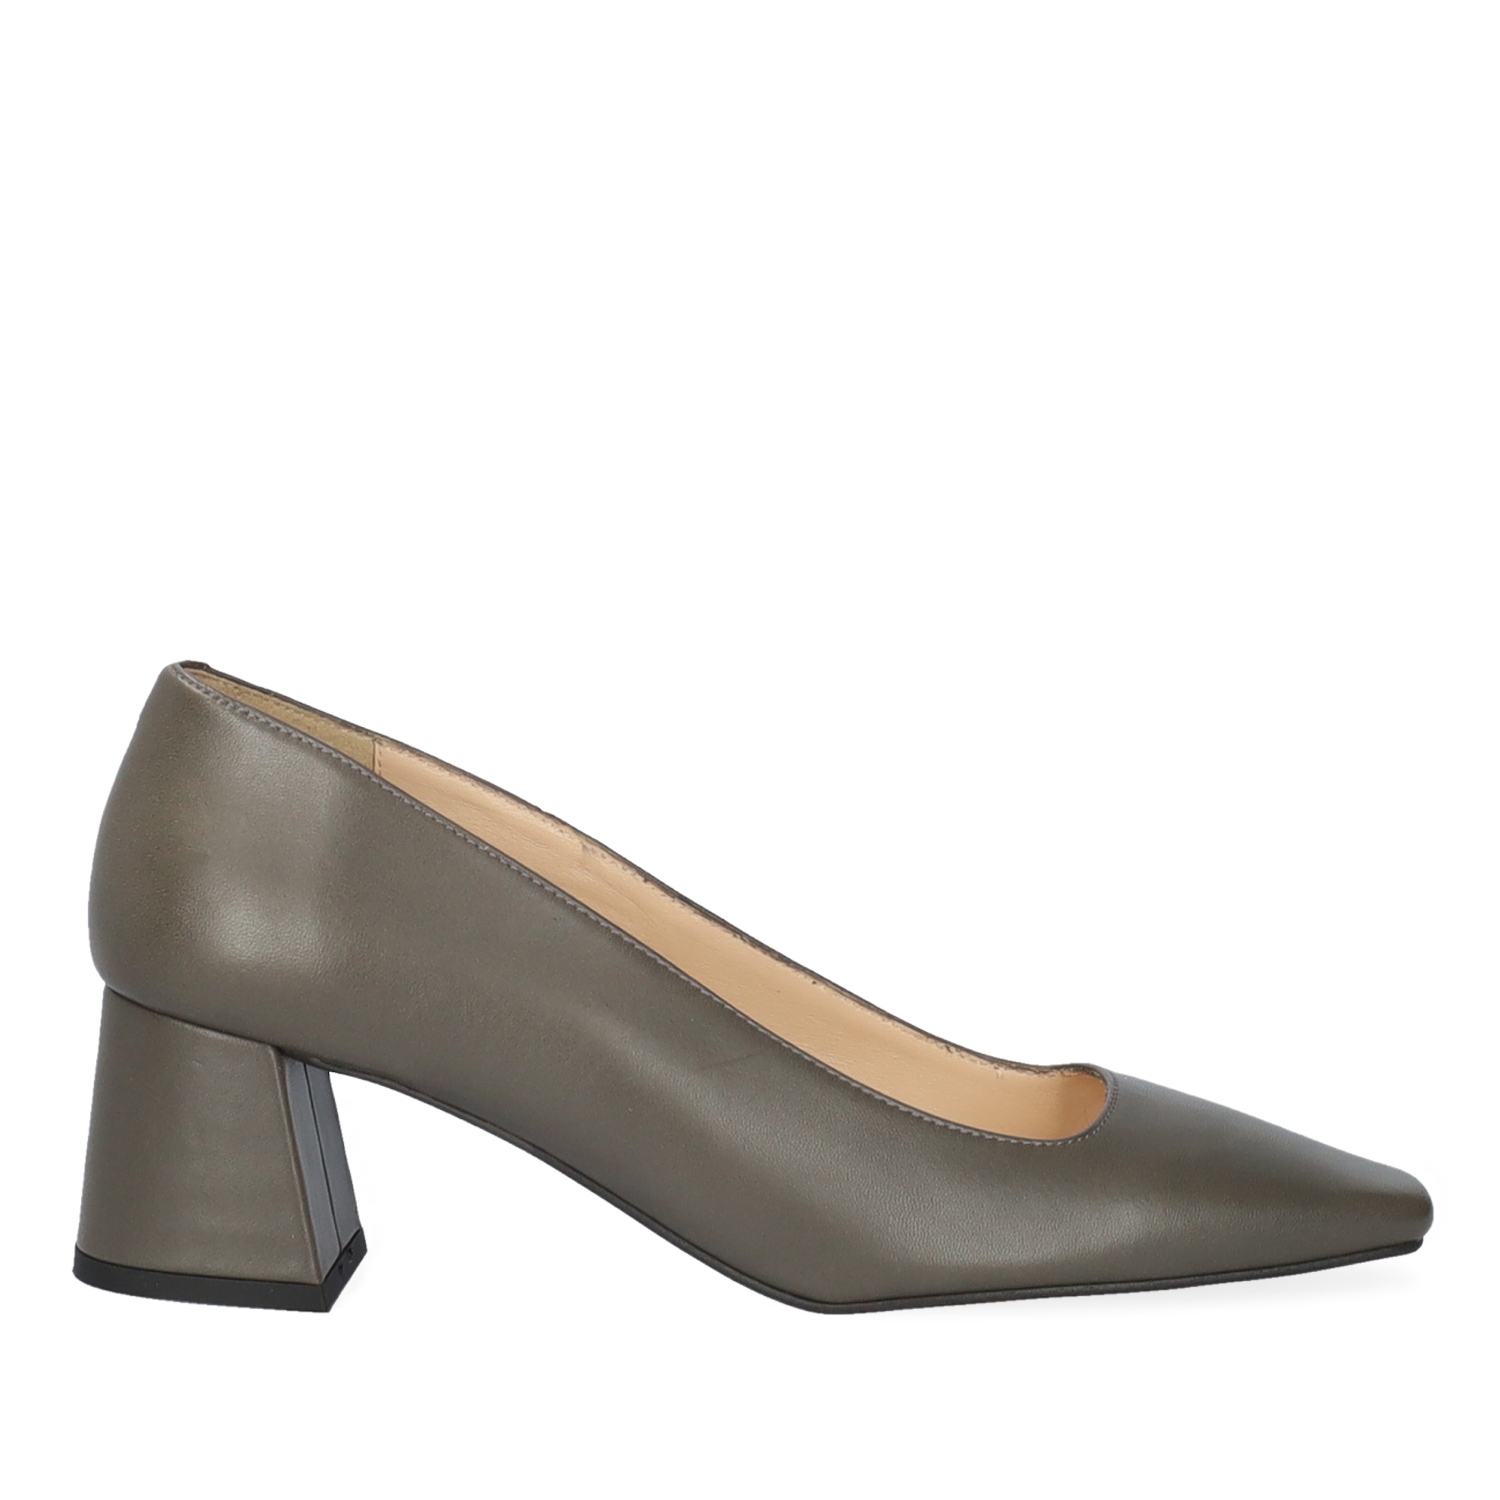 Heeled shoe in grey leather 